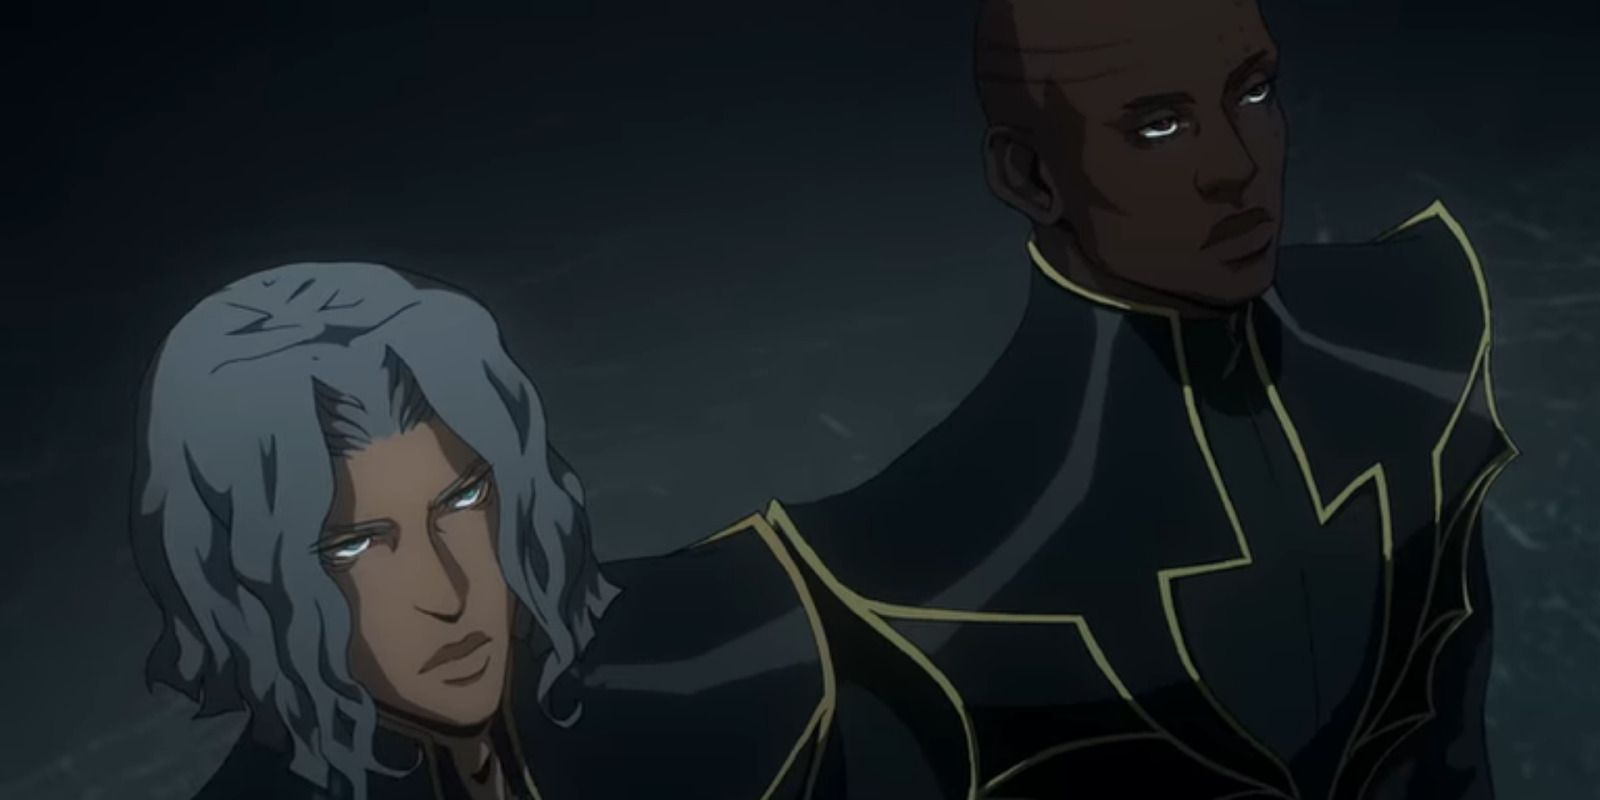 Hector and Isaac, standing next to each other Dutch angle